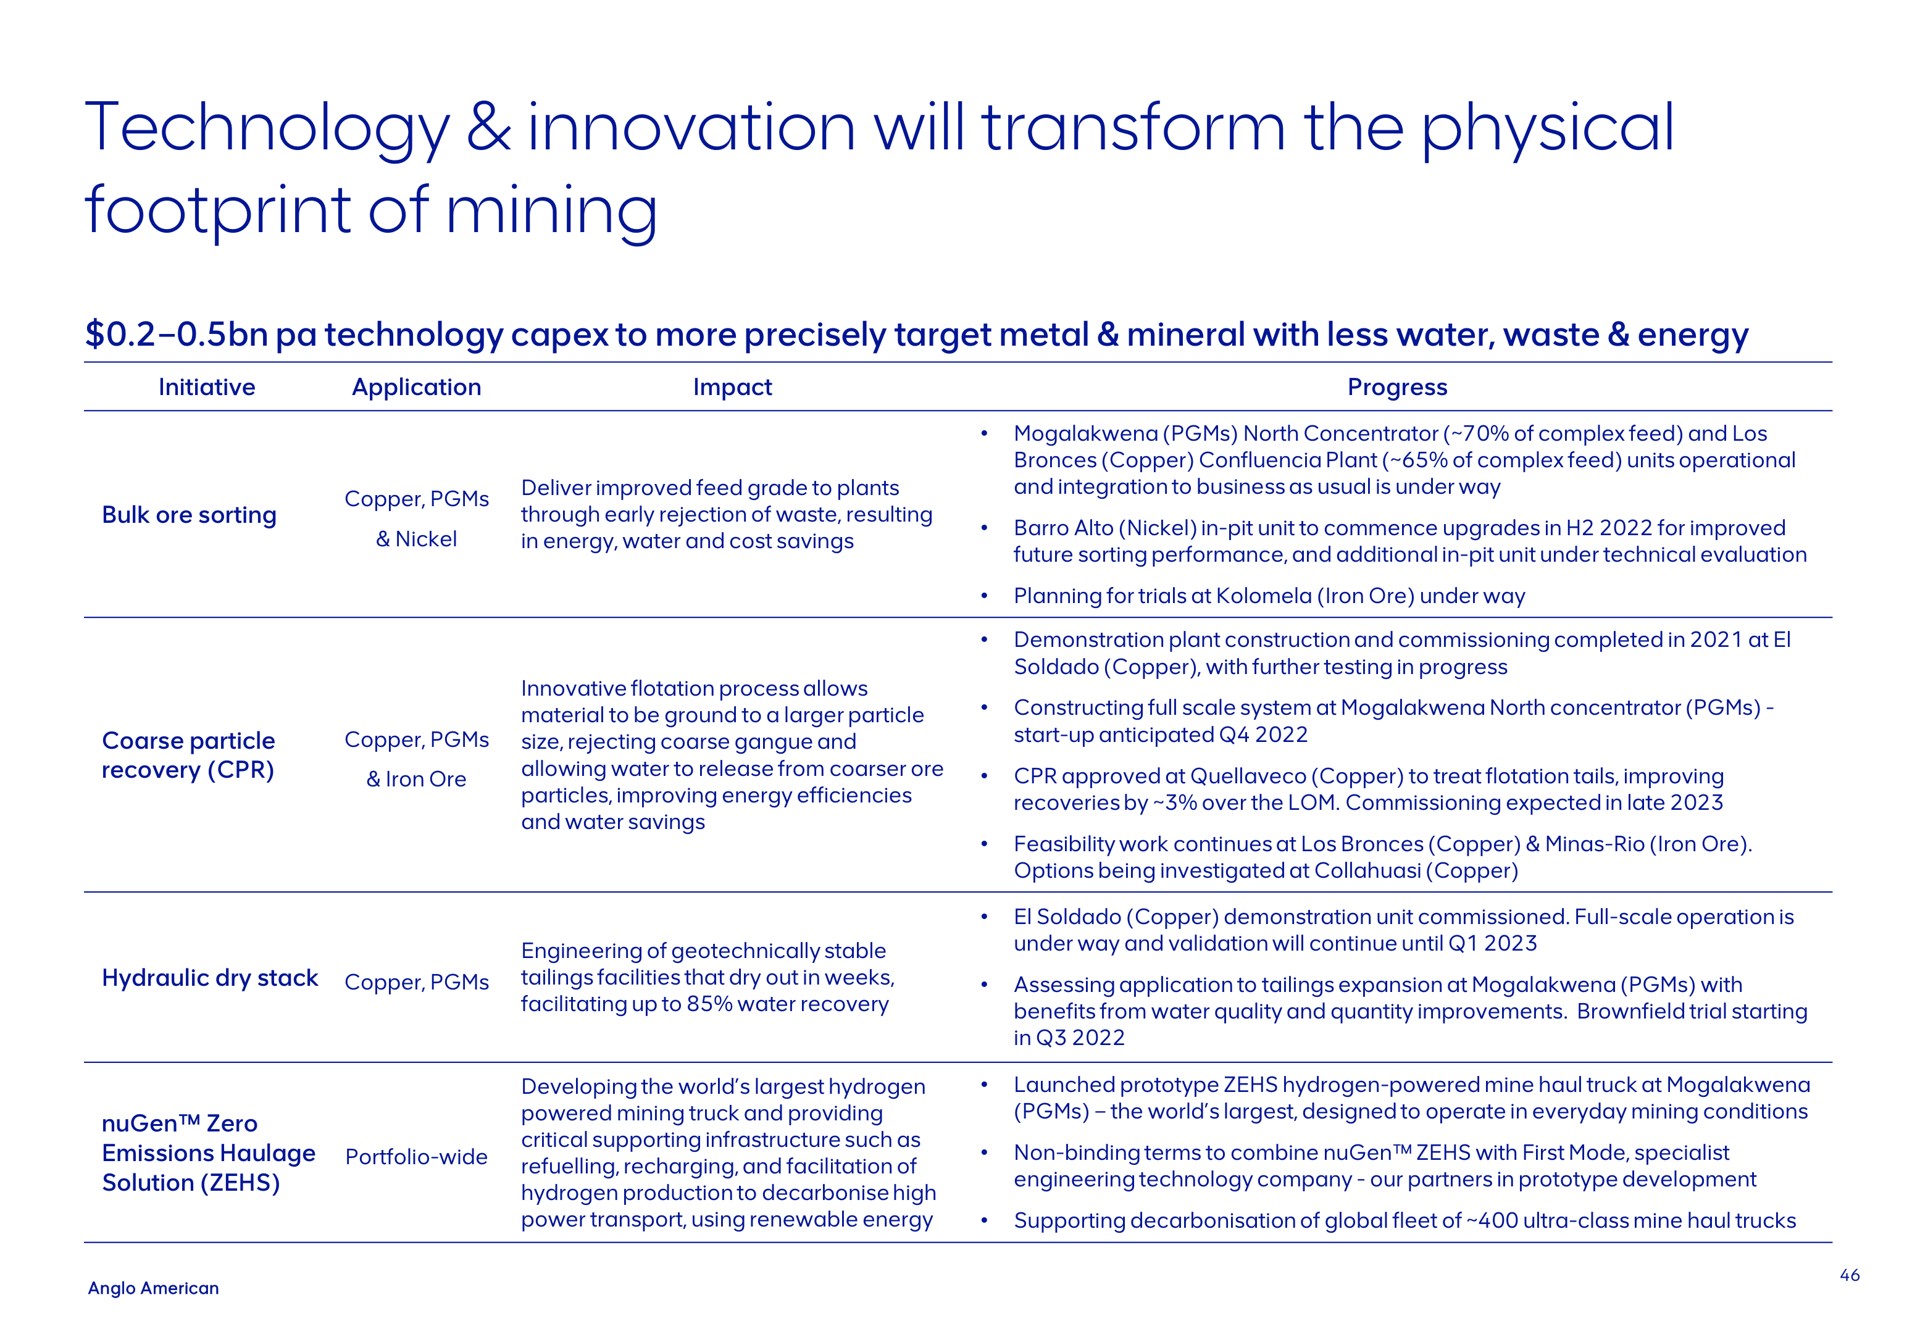 technology innovation will transform the physical footprint of mining to more precisely target metal mineral with less water waste energy initiative application impact progress bulk ore sorting copper nickel deliver improved feed grade to plants through early rejection waste resulting in energy water and cost savings coarse particle recovery copper ore innovative flotation process allows material to be ground to a particle size rejecting coarse gangue and allowing water to release from ore particles improving energy efficiencies and water savings hydraulic dry stack copper engineering stable tailings facilities that dry out in weeks facilitating up to water recovery north concentrator complex feed and copper plant complex feed units operational and integration to business as usual is under way alto nickel in pit unit to commence upgrades in for improved future sorting performance and additional in pit unit under technical evaluation planning for trials at iron ore under way demonstration plant construction and commissioning completed in at soldado copper with further testing in progress constructing full scale system at north concentrator start up anticipated approved at copper to treat flotation tails improving recoveries by over commissioning expected in late feasibility work continues at copper minas rio iron ore options being investigated at copper soldado copper demonstration unit commissioned full scale operation is under way and validation continue until assessing application to tailings expansion at with benefits from water quality and quantity improvements trial starting in zero emissions haulage solution portfolio wide developing world hydrogen powered truck and providing critical supporting infrastructure such as refuelling recharging and facilitation hydrogen production to high power transport using renewable energy launched prototype hydrogen powered mine haul truck at world designed to operate in everyday conditions non binding terms to combine with first mode specialist engineering company our partners in prototype development supporting global fleet ultra class mine haul trucks | AngloAmerican